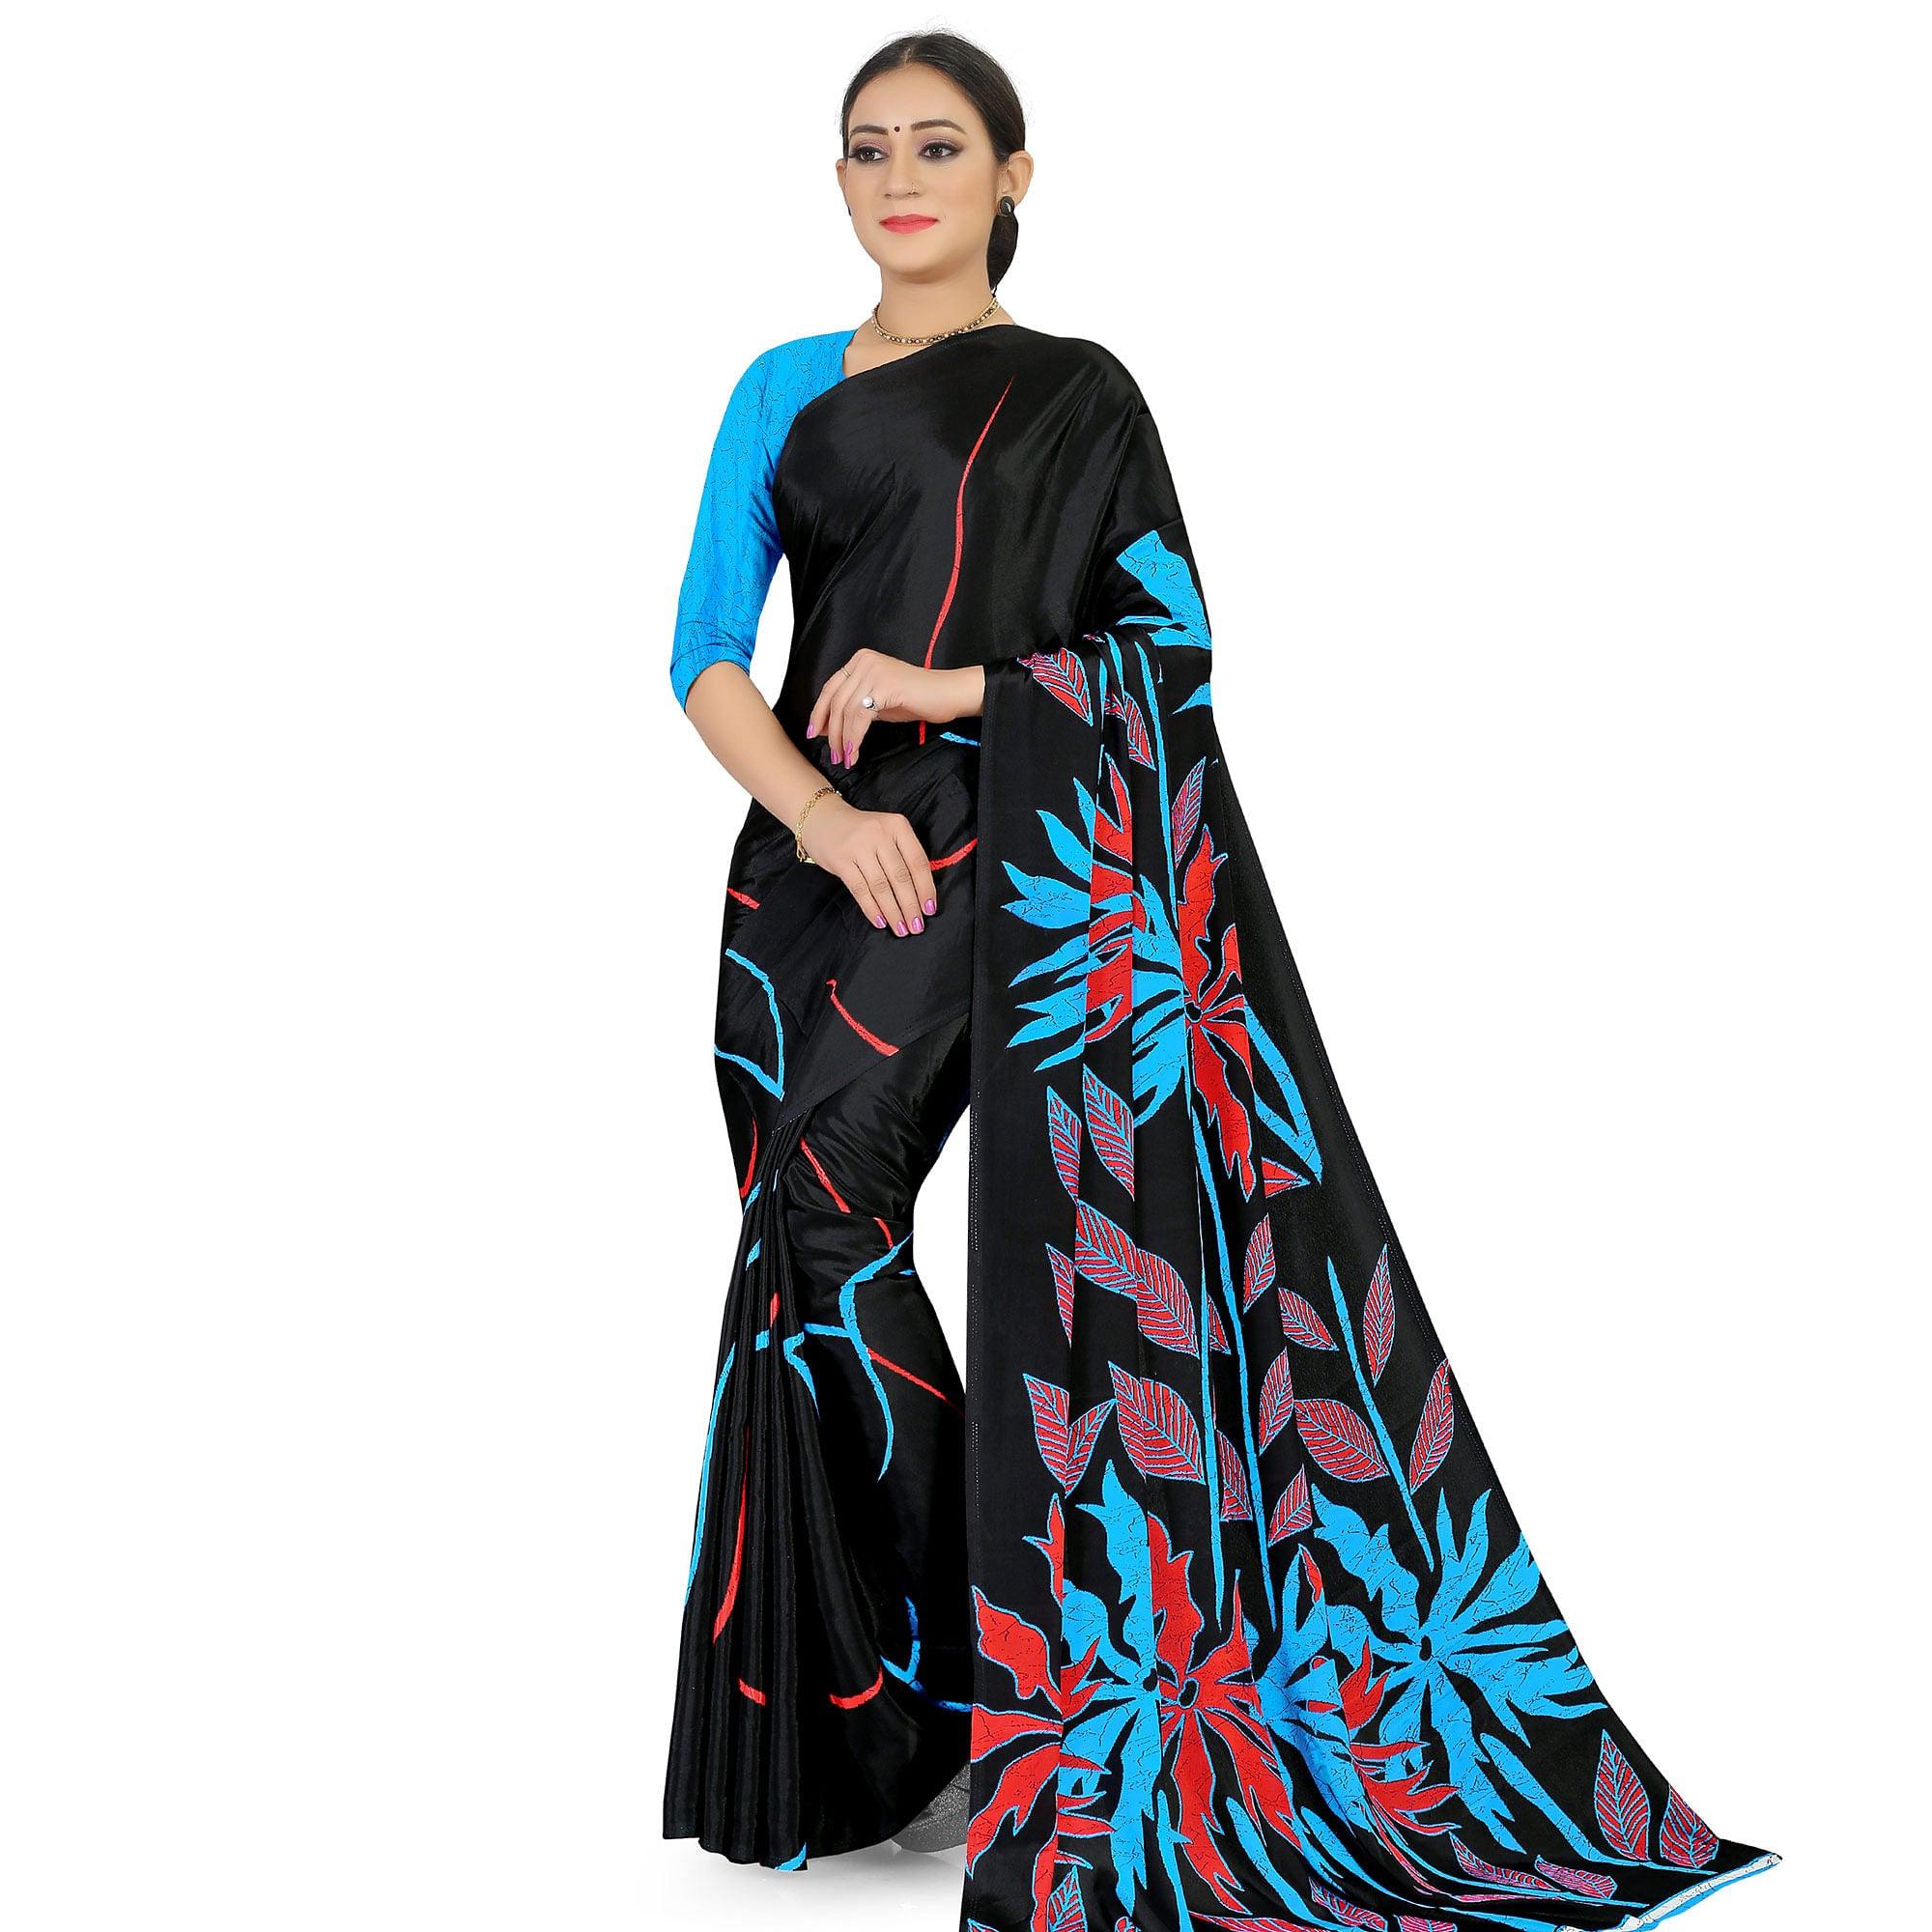 Engrossing Black Colored Casual Wear Printed Satin Saree - Peachmode